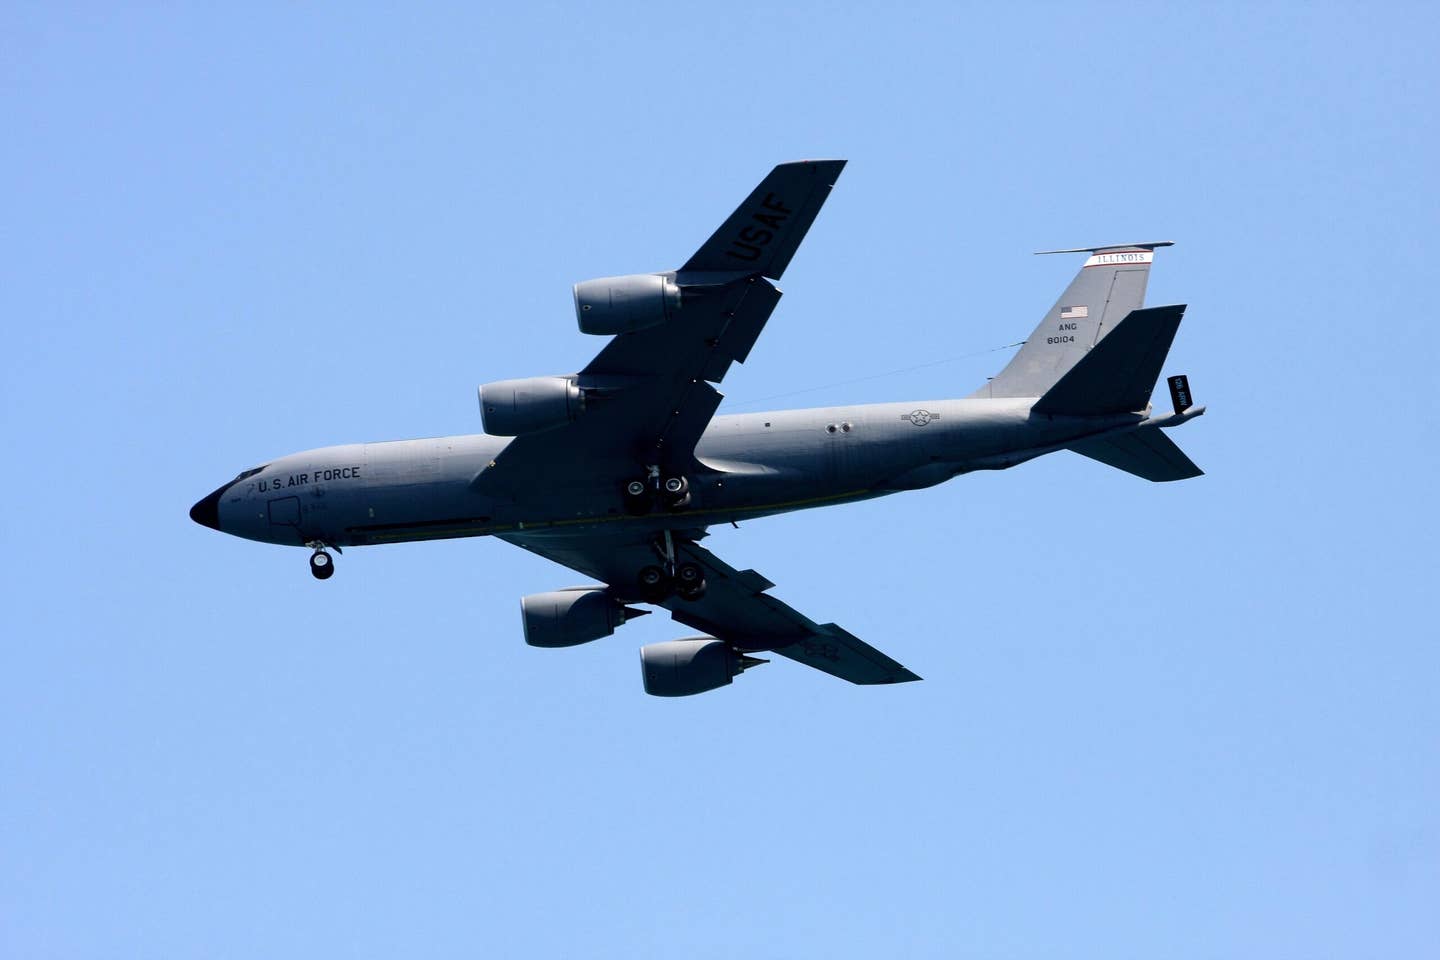 Of the eight planes reviewed by GAO, the KC-135 had the highest mission capable rate, with 71% of its fleet of 396 Stratotankers available to fly as of Fiscal Year 2021. (Photo By Raymond Boyd/Michael Ochs Archives/Getty Images)